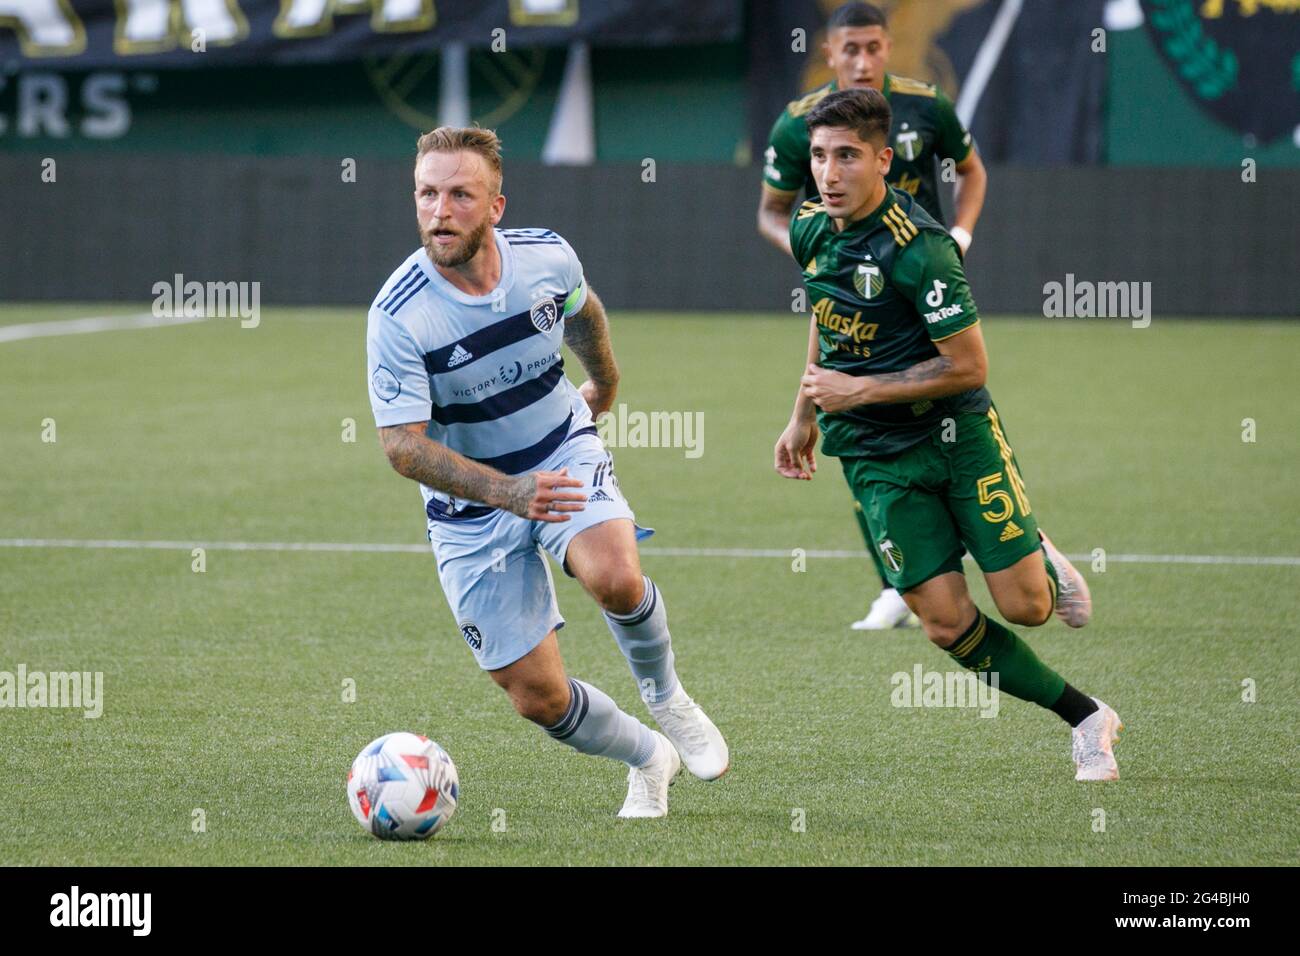 The Timbers' Claudio Bravo (R) chases down Johnny Russell. The Portland Timbers Football Club defeated Sporting KC (Kansas City) 2-1 at Portland, Oregon’s Providence Park on June 19, 2021, with a crowd for the first time allowed at 80% of capacity. Portland overcame an early 1-0 deficit with two first-half goals by Dairon Asprilla and Marvin Loria.  (Photo by John Rudoff/Sipa USA) Stock Photo